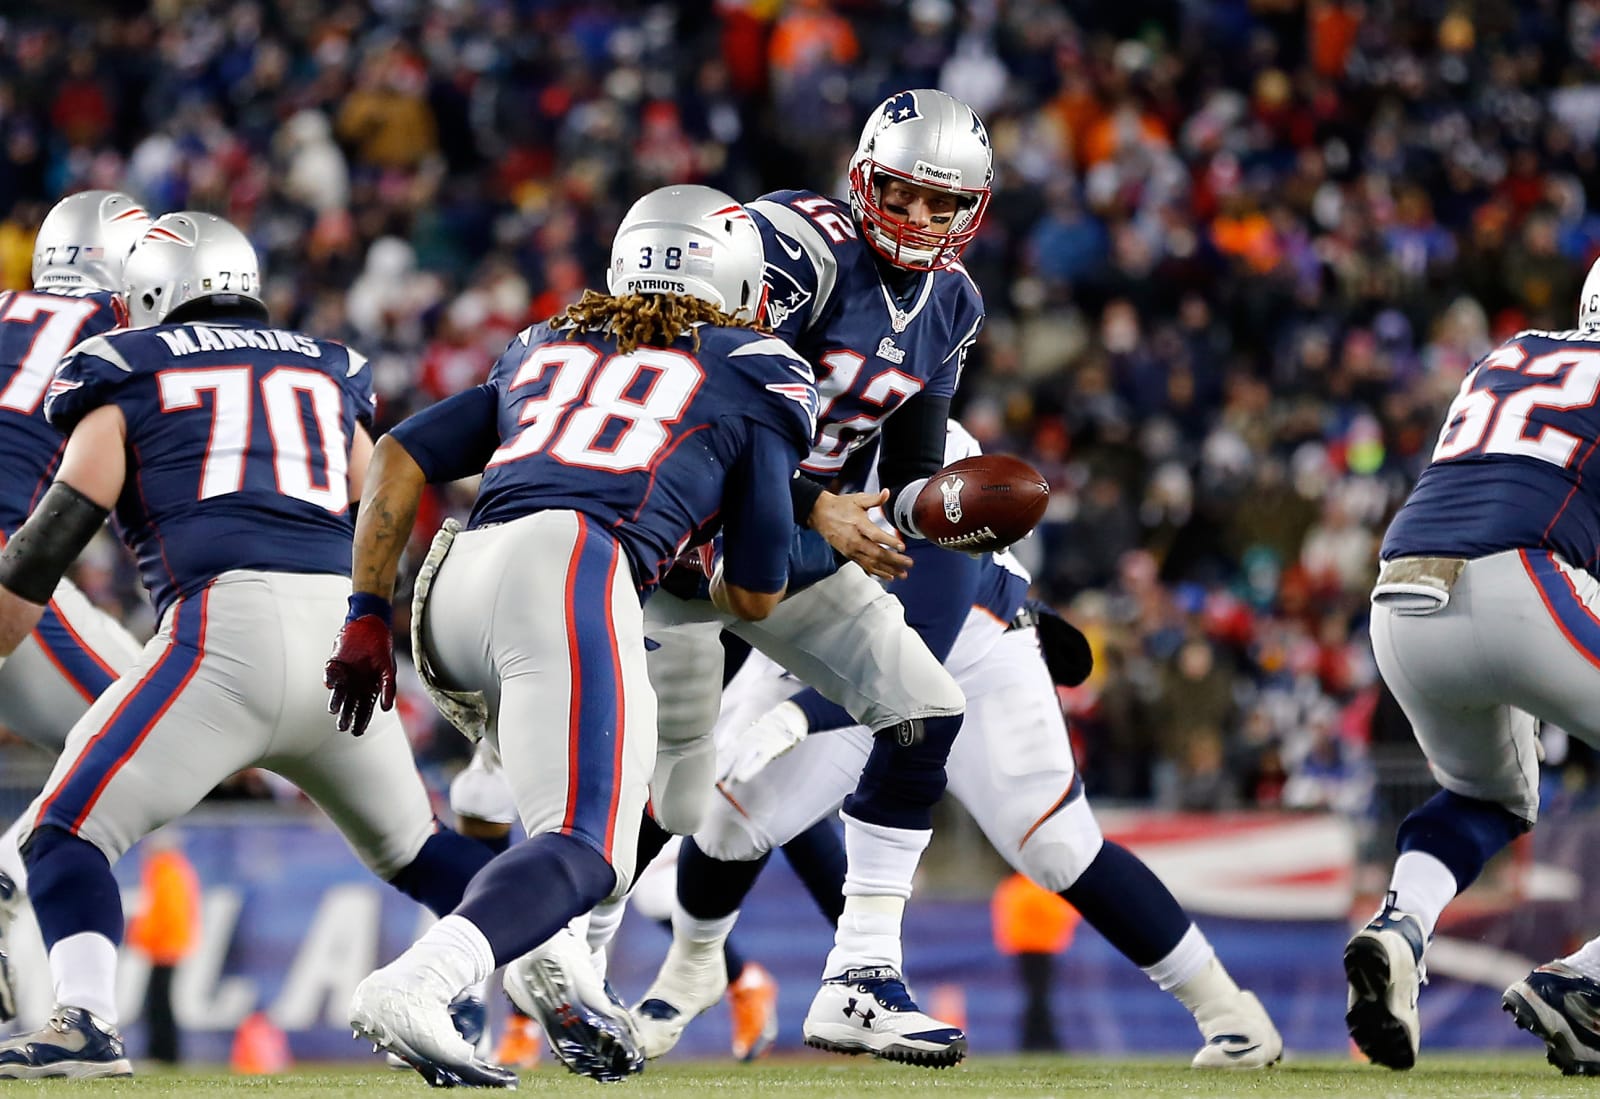 Top 5 New England Patriots home games of the decade